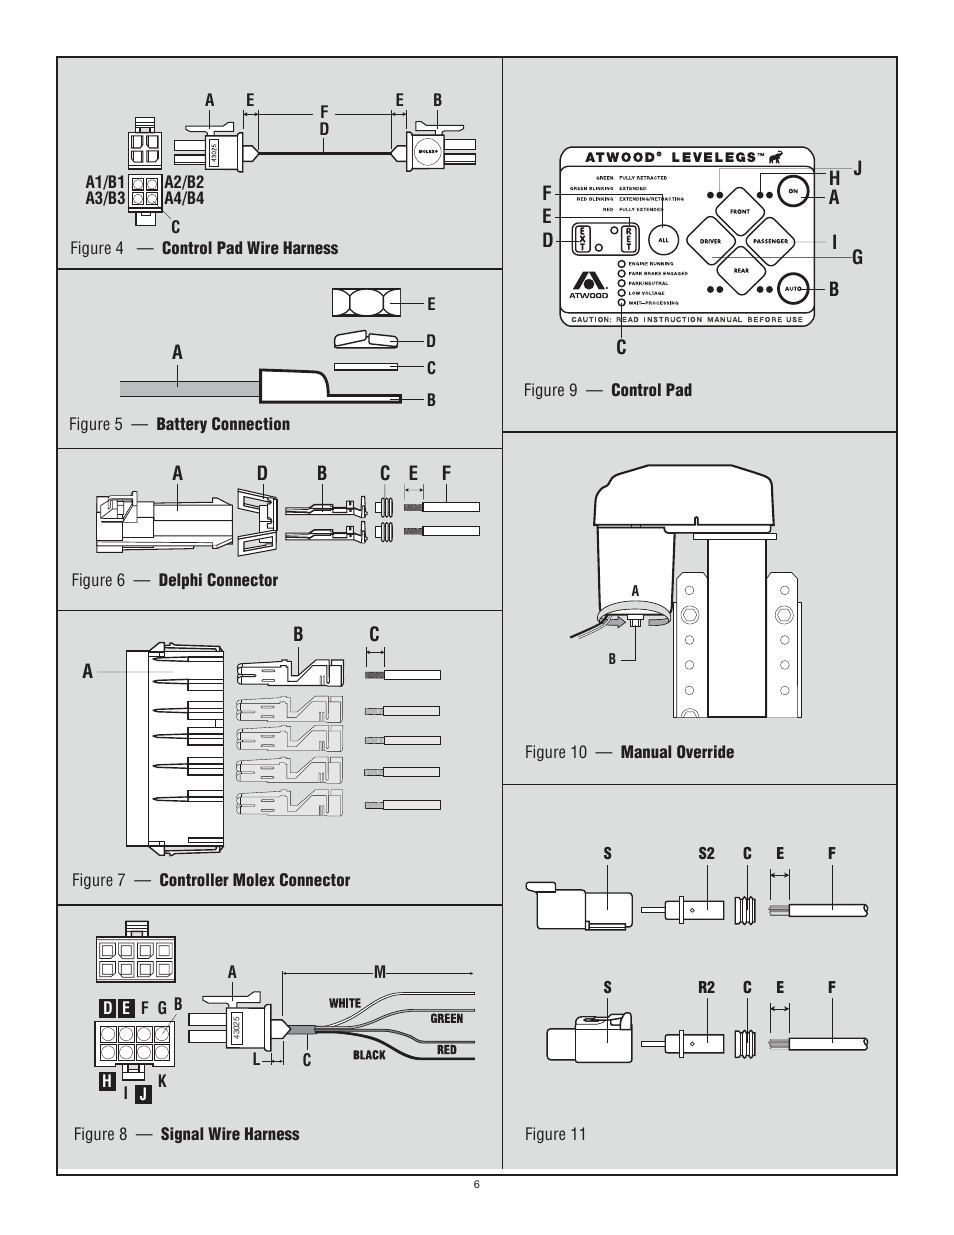 atwood Levelegs System User Manual | Page 6 / 7